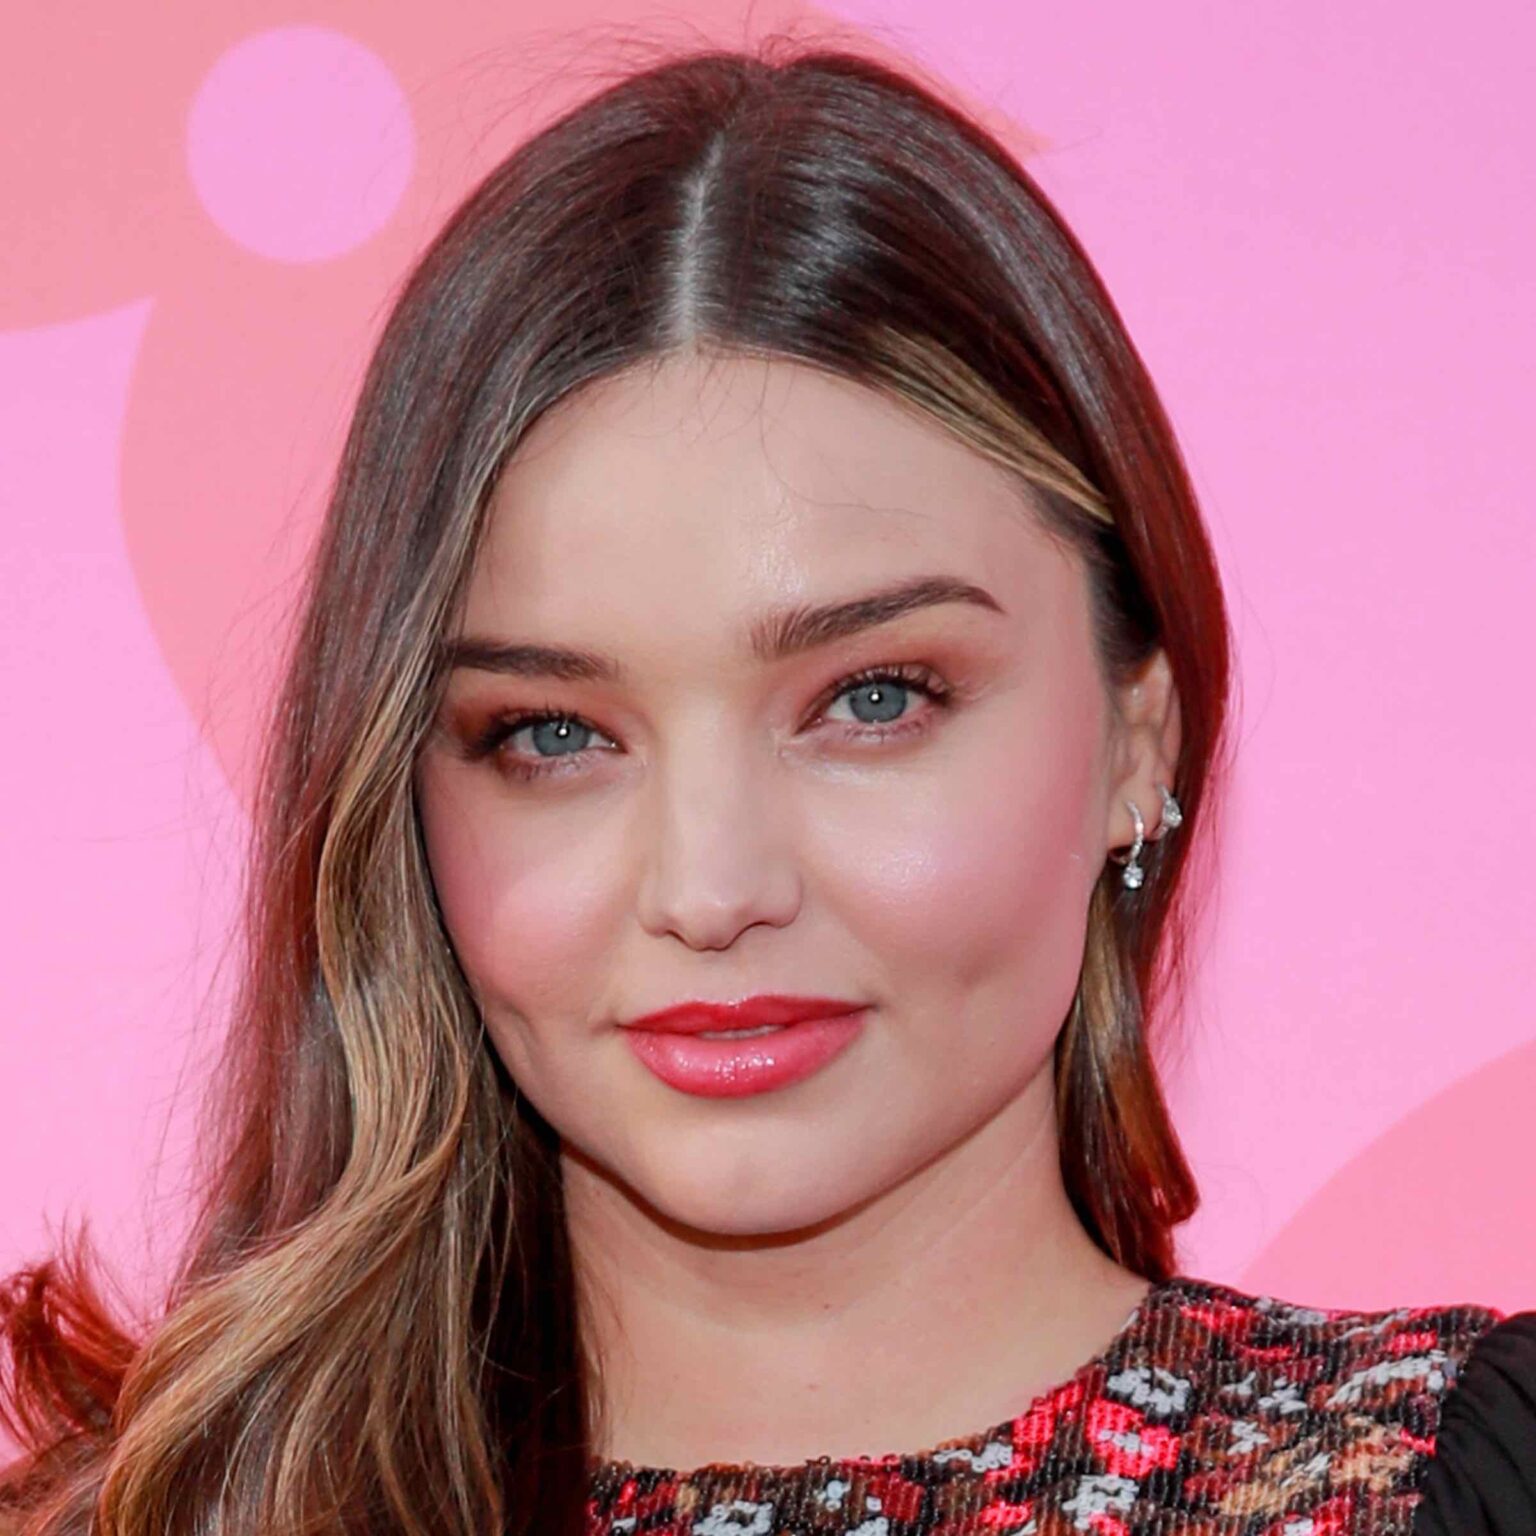 How does Orlando Bloom's ex remember him? Get all the details from Miranda Kerr about how she now sees her ex.